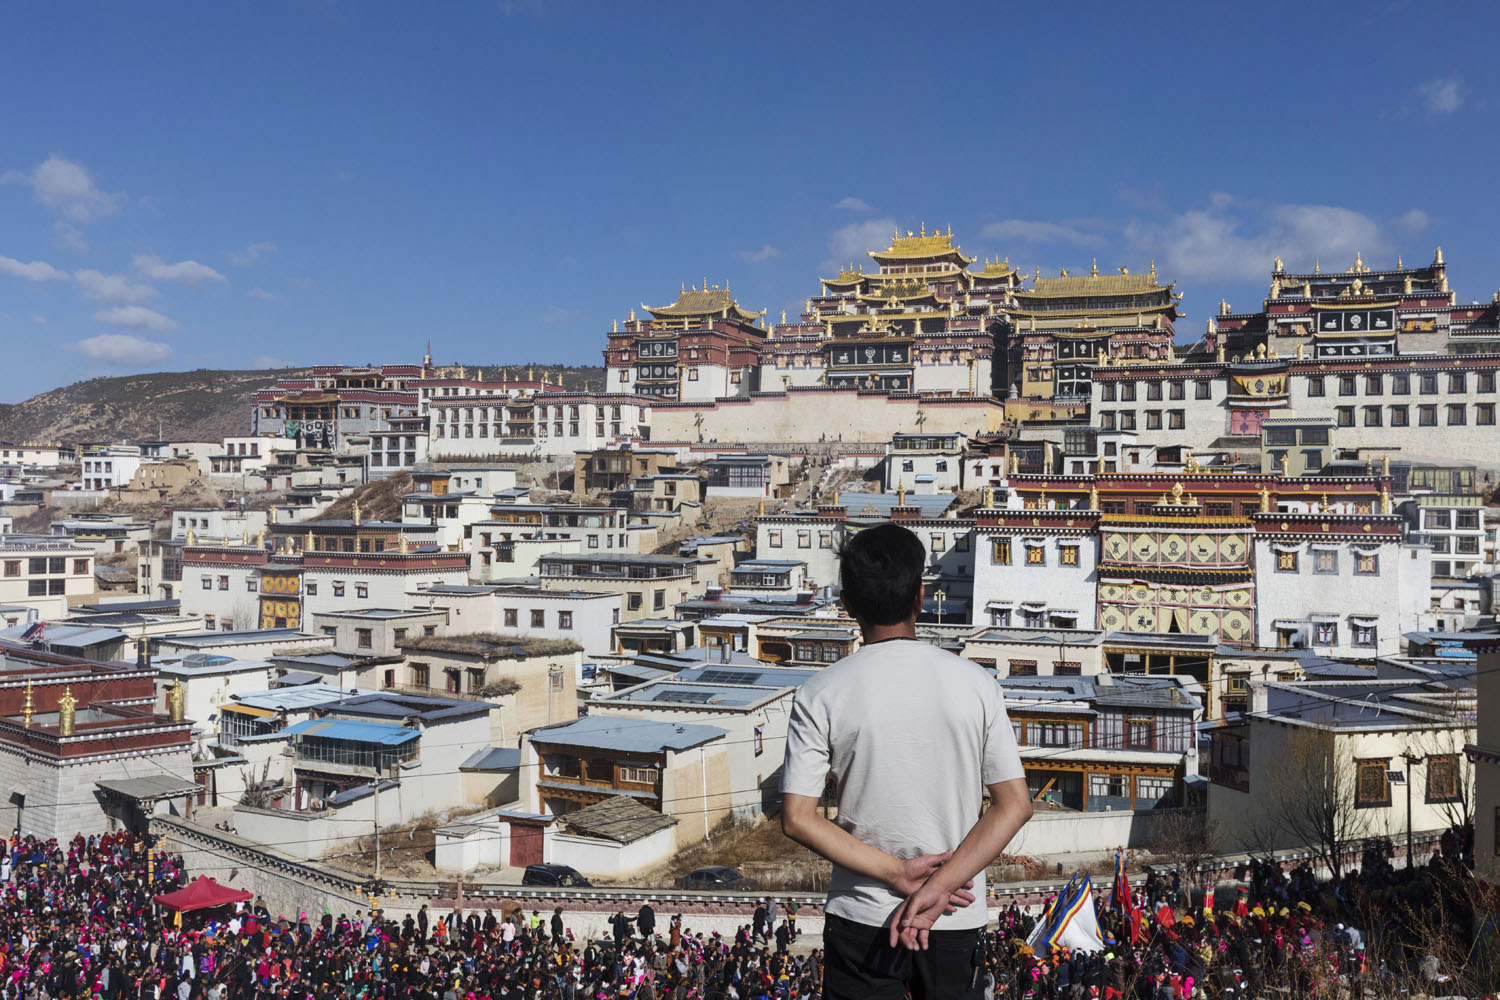 A man observes the crowd below him, gathered for the parade as it passes the front of JingXiang Village, at the base of the SongZangLin Monastary. Yunnan, China. March 2, 2018.